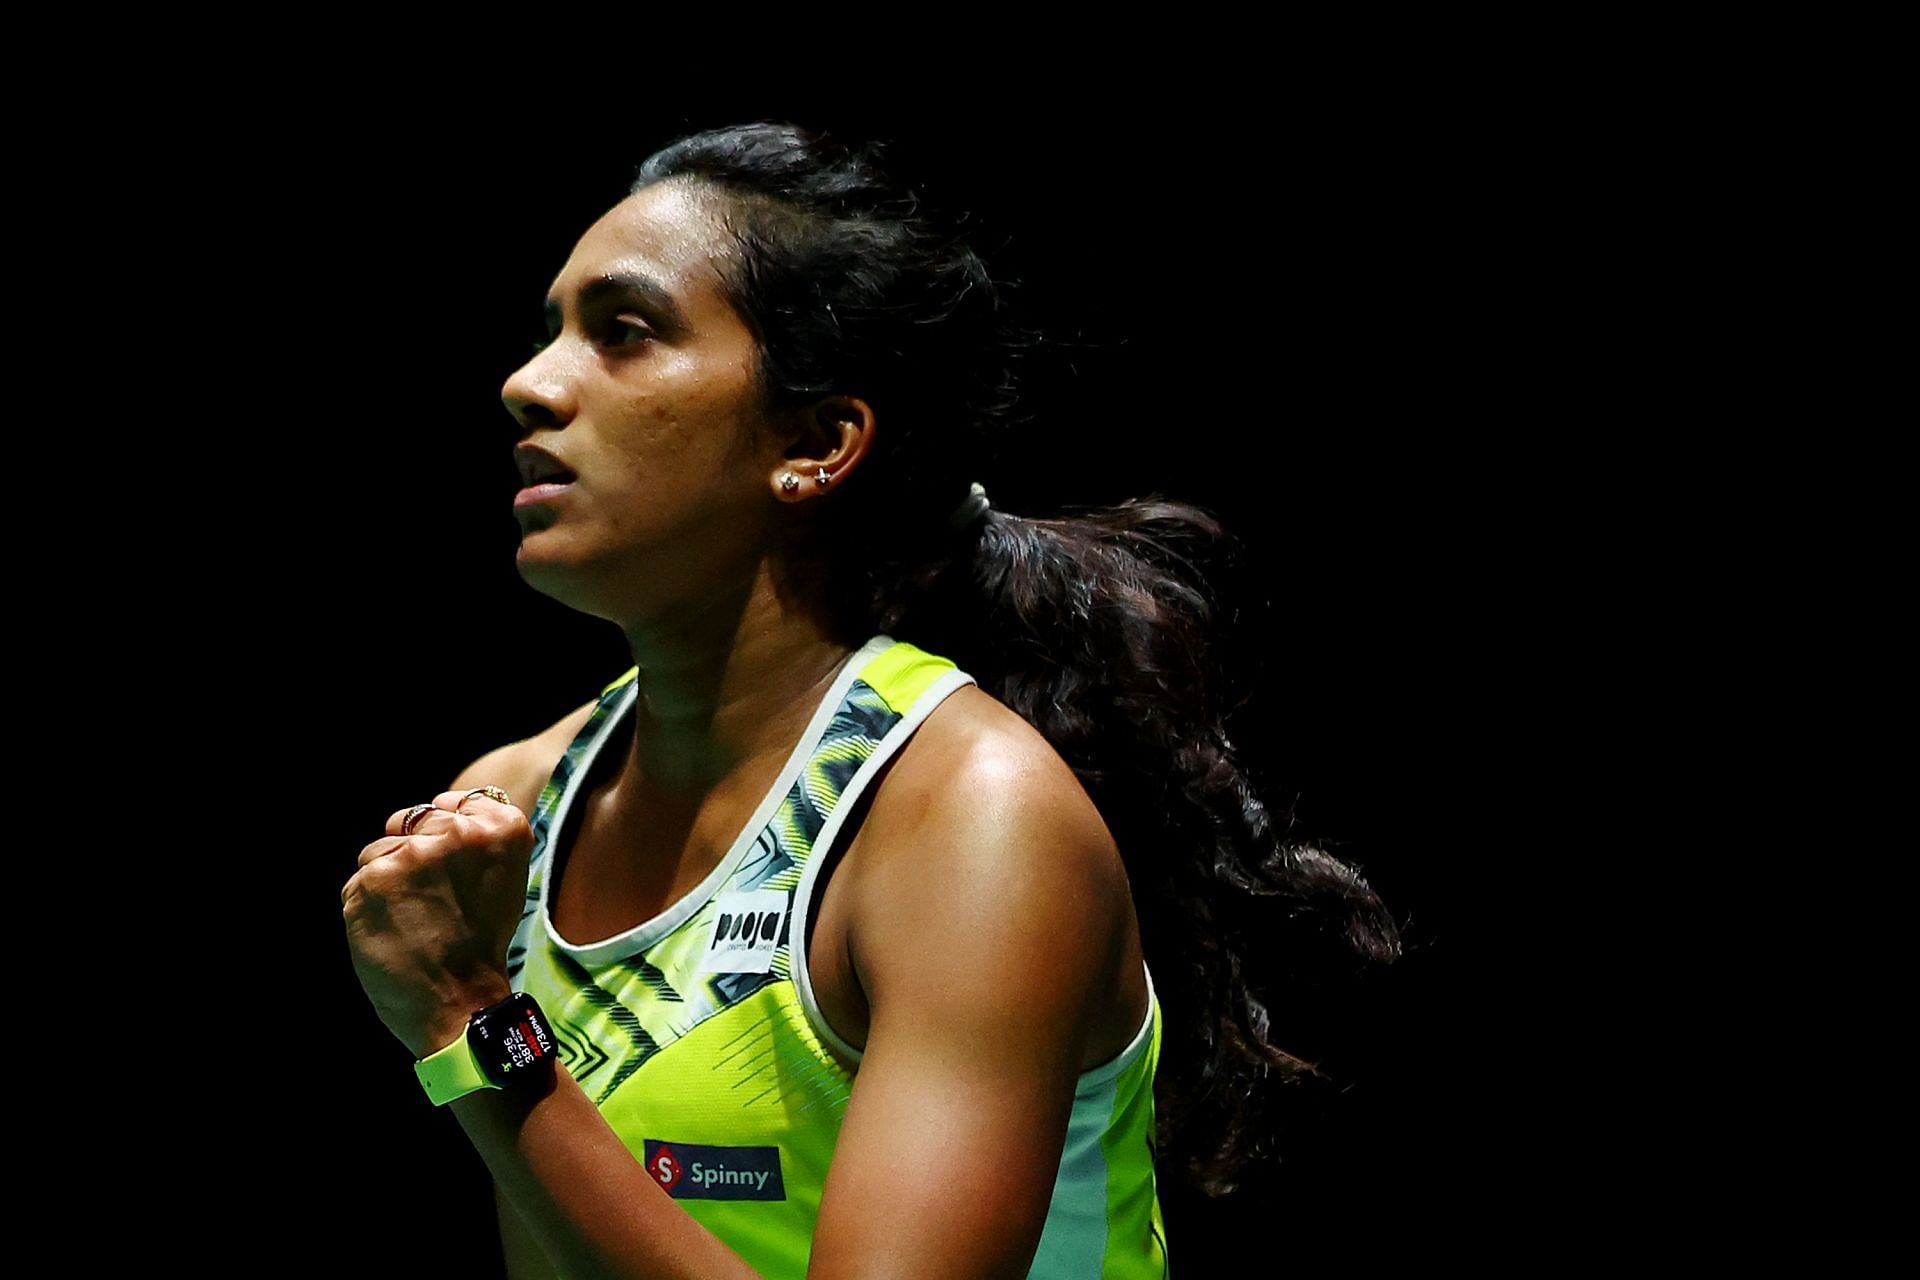 PV Sindhu in action at the Singapore Open (Image courtesy: Getty Images)